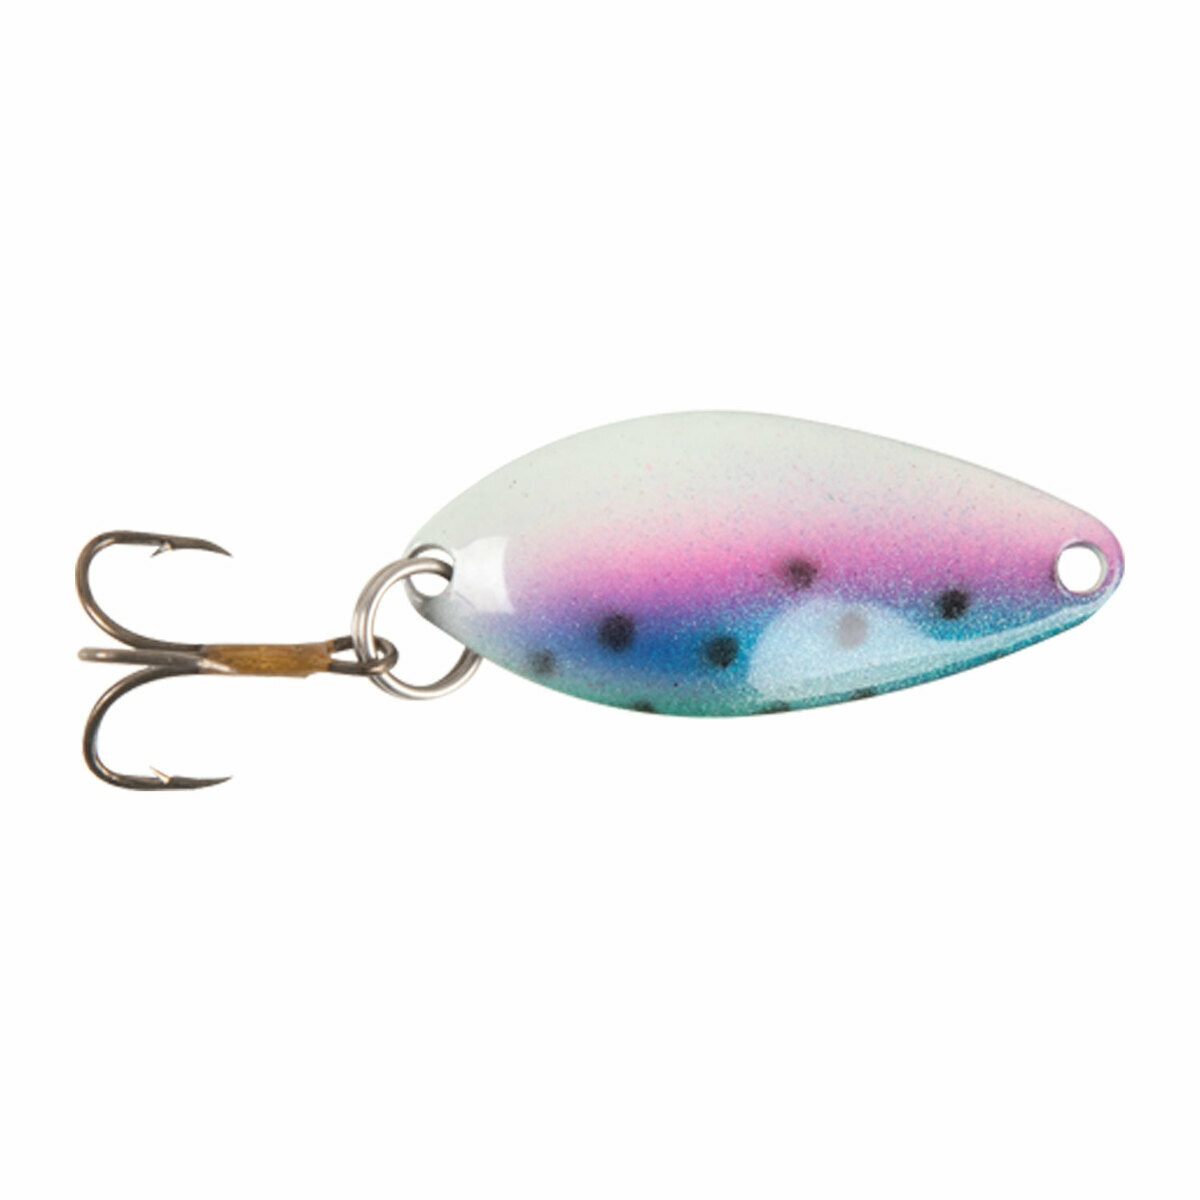 Double x Tackle Lill Lighting - Perch